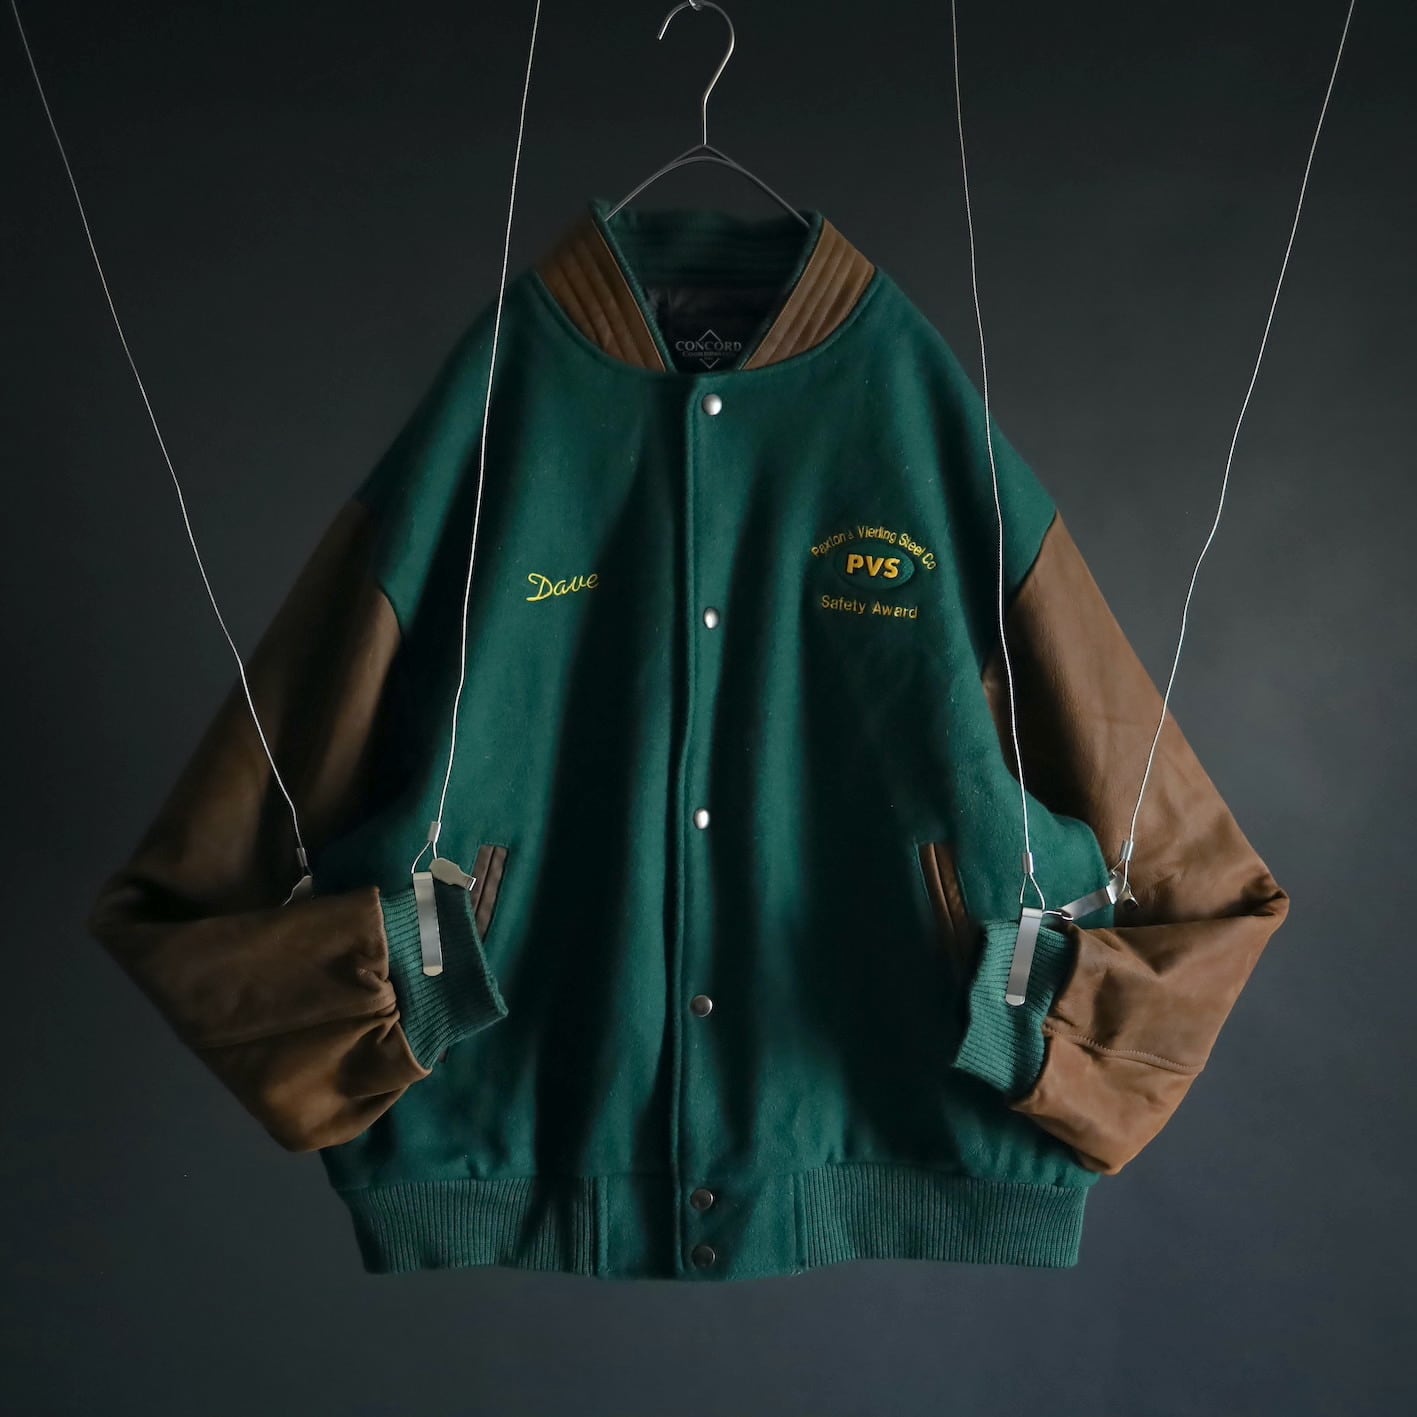 over silhouette green melton wool × brown leather switching design stadium  jumper